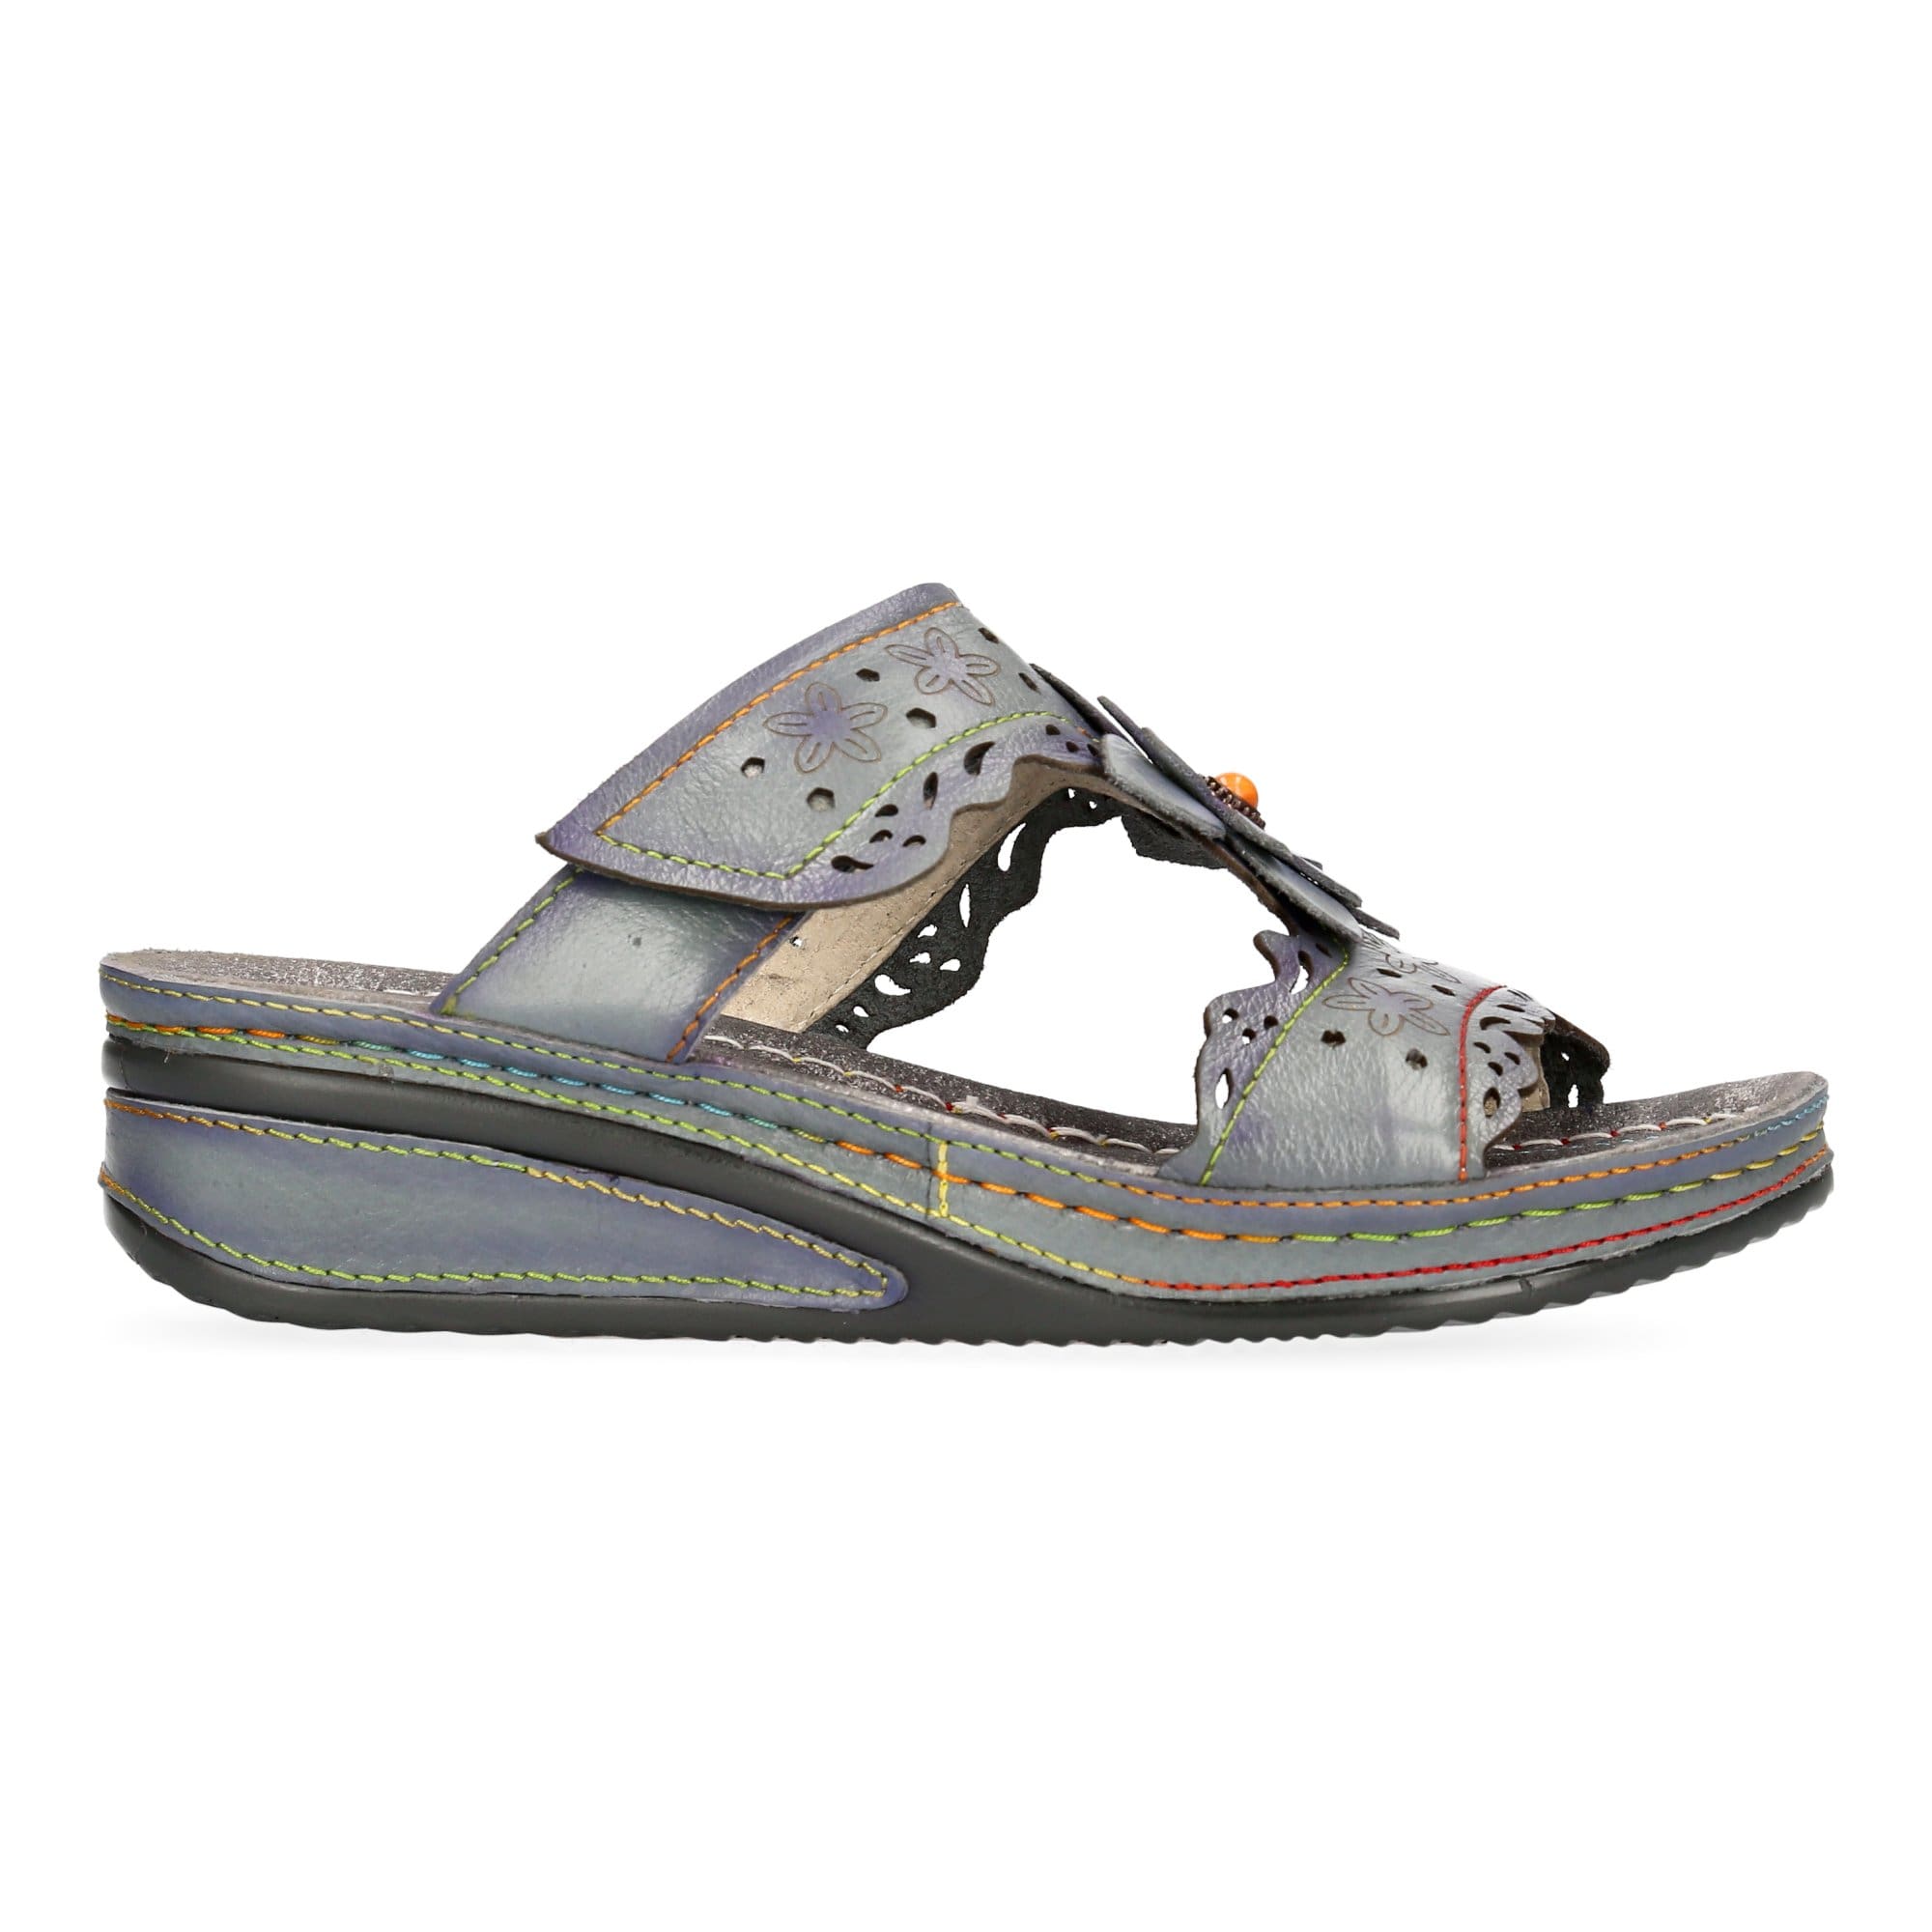 Chaussures JACDISO 05 - 35 / Gris - Mule